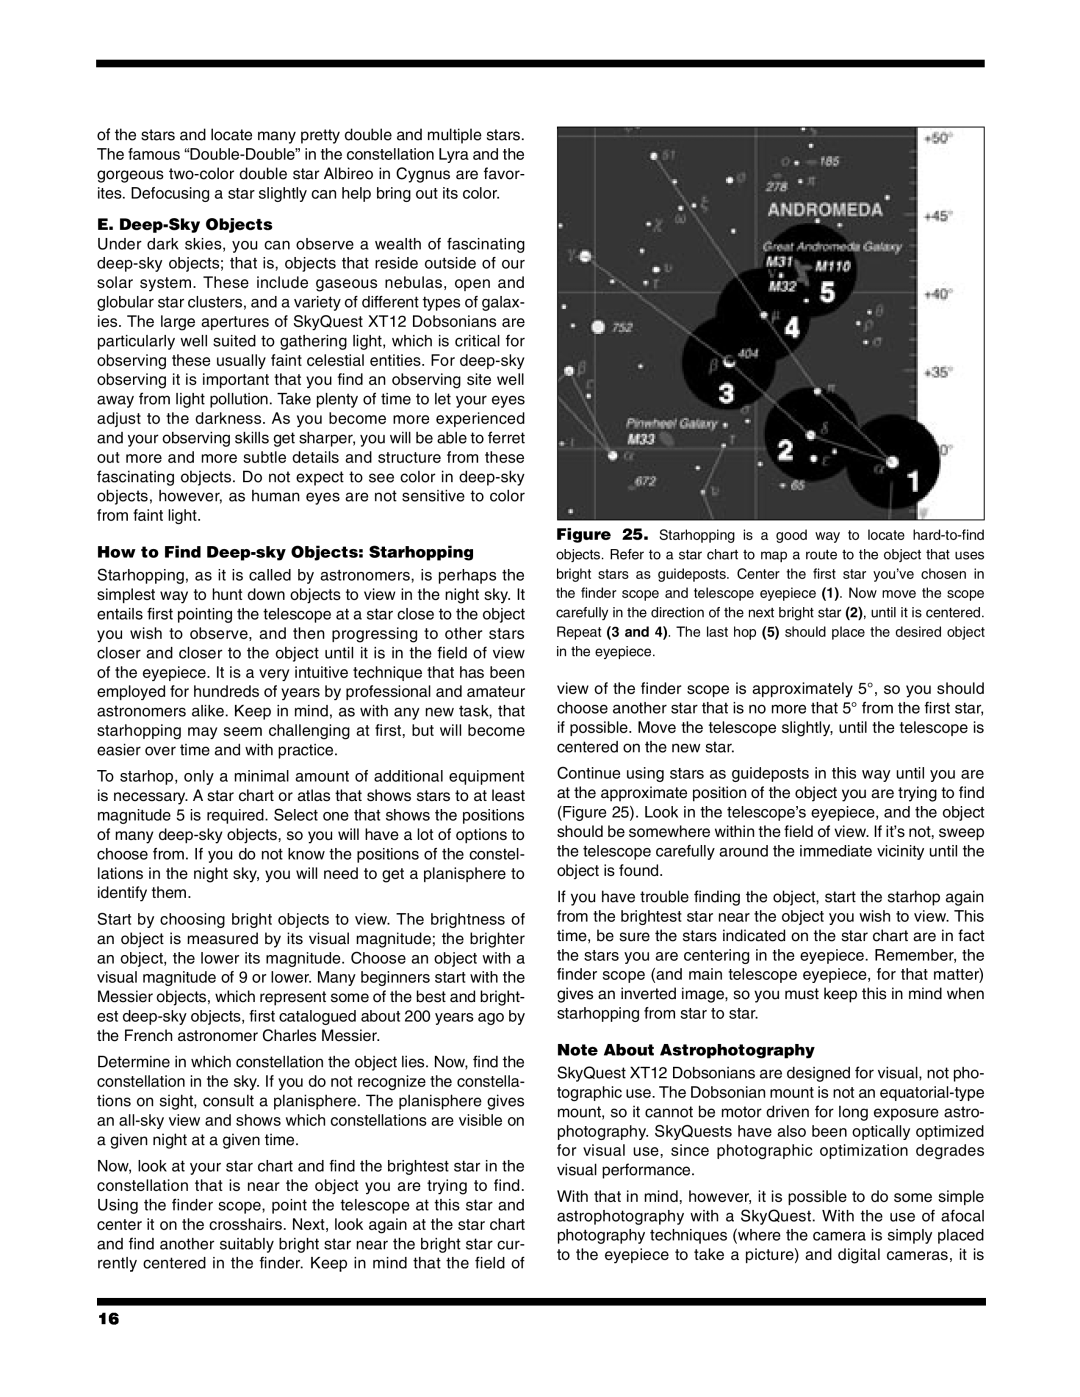 Orion 9966 instruction manual E. Deep-Sky Objects, How to Find Deep-sky Objects Starhopping, Note About Astrophotography 